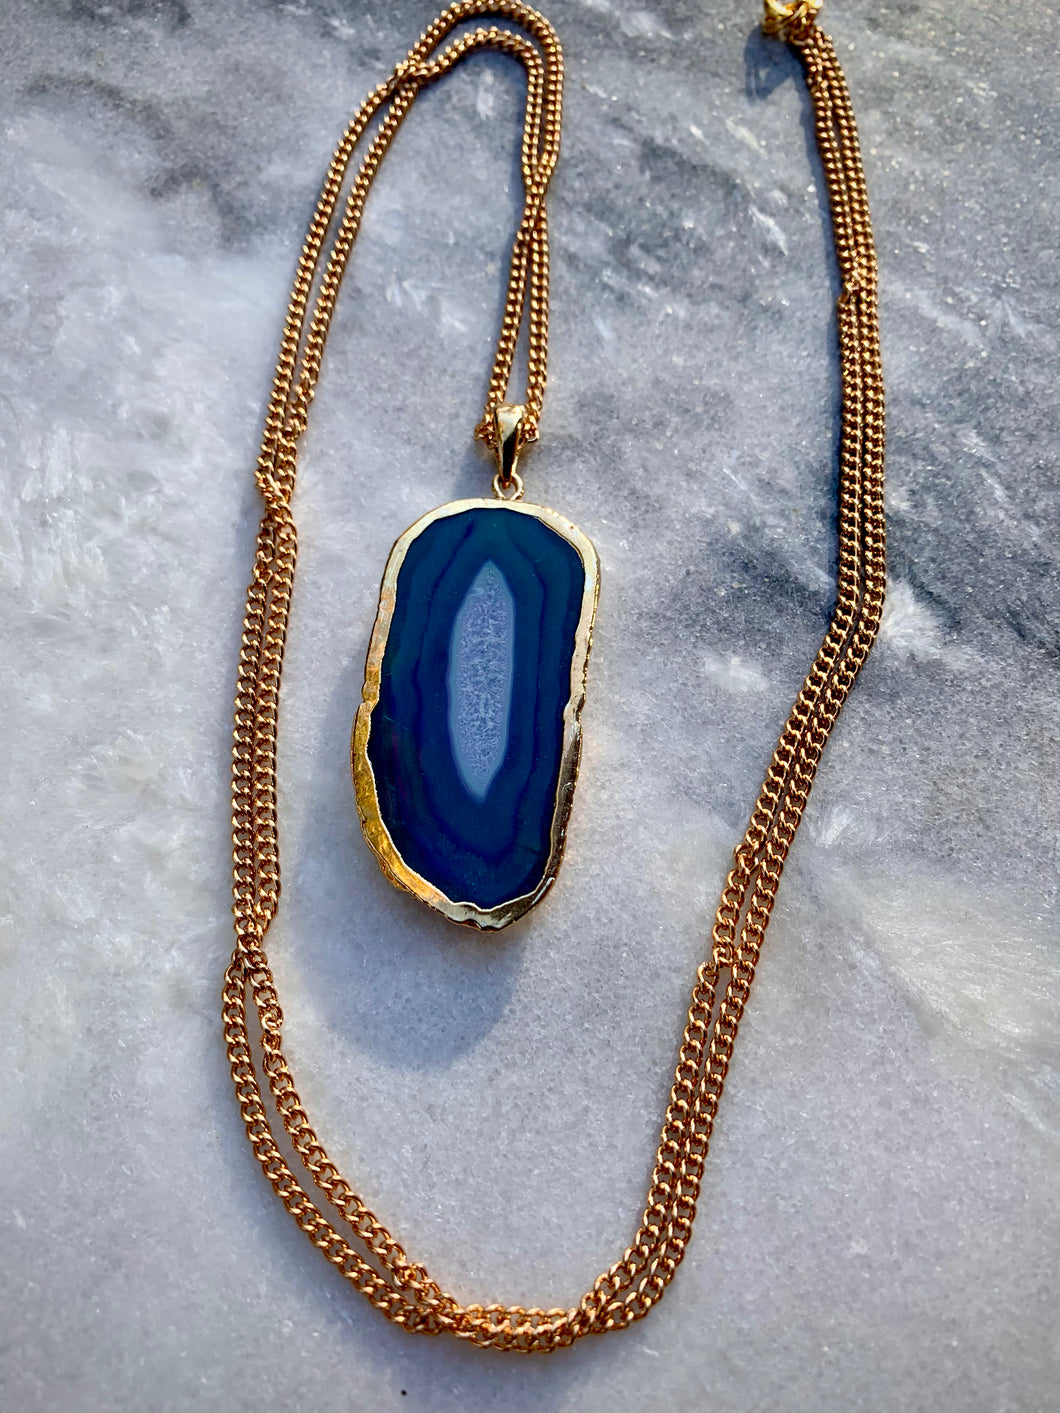 Blue Agate Pendant, Gold Plated Chain Necklace